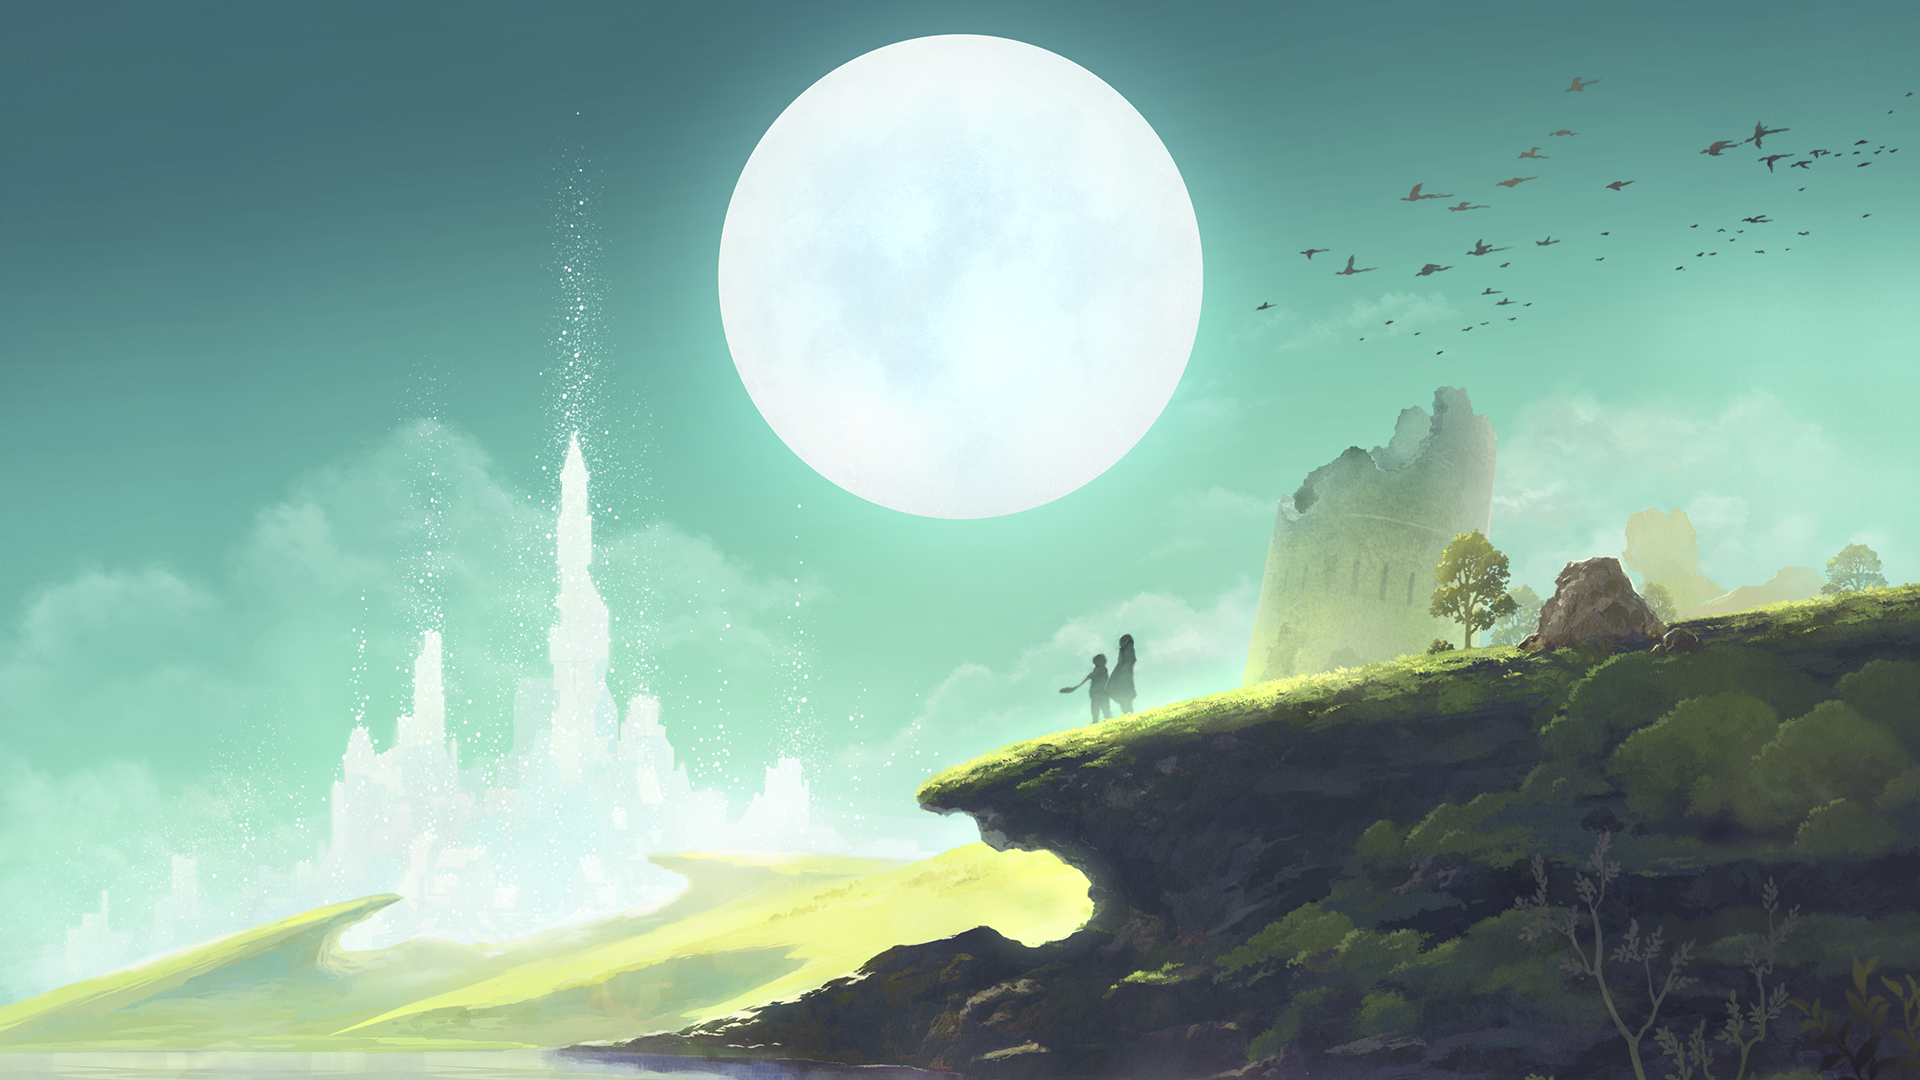 Lost Sphear background image